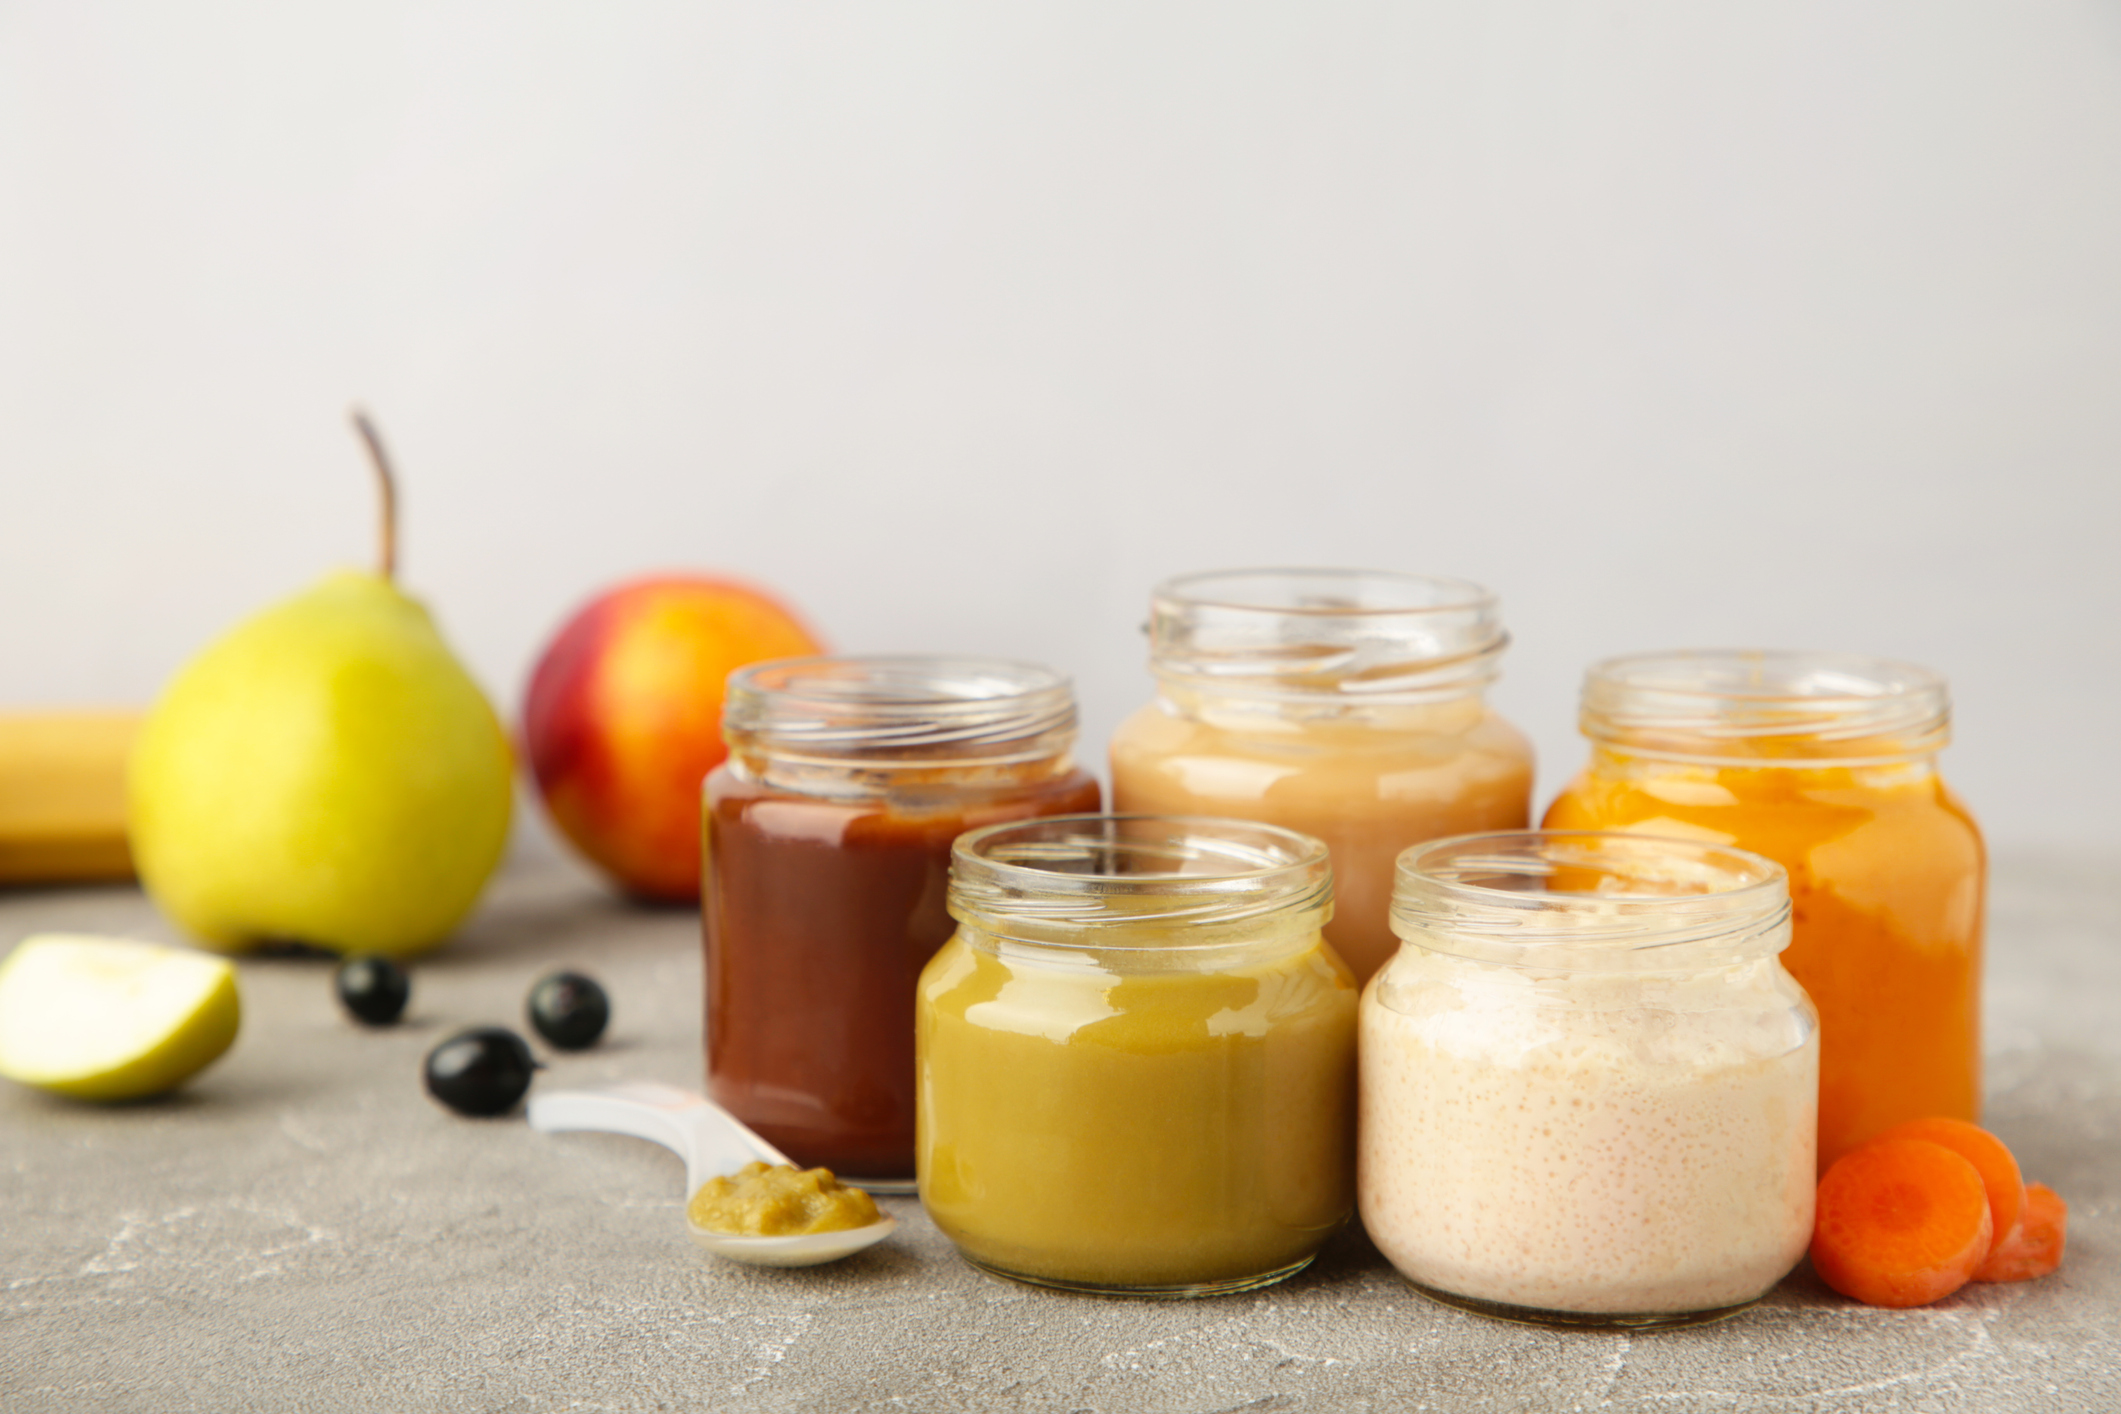 Glass jars with nutrient baby food on grey background